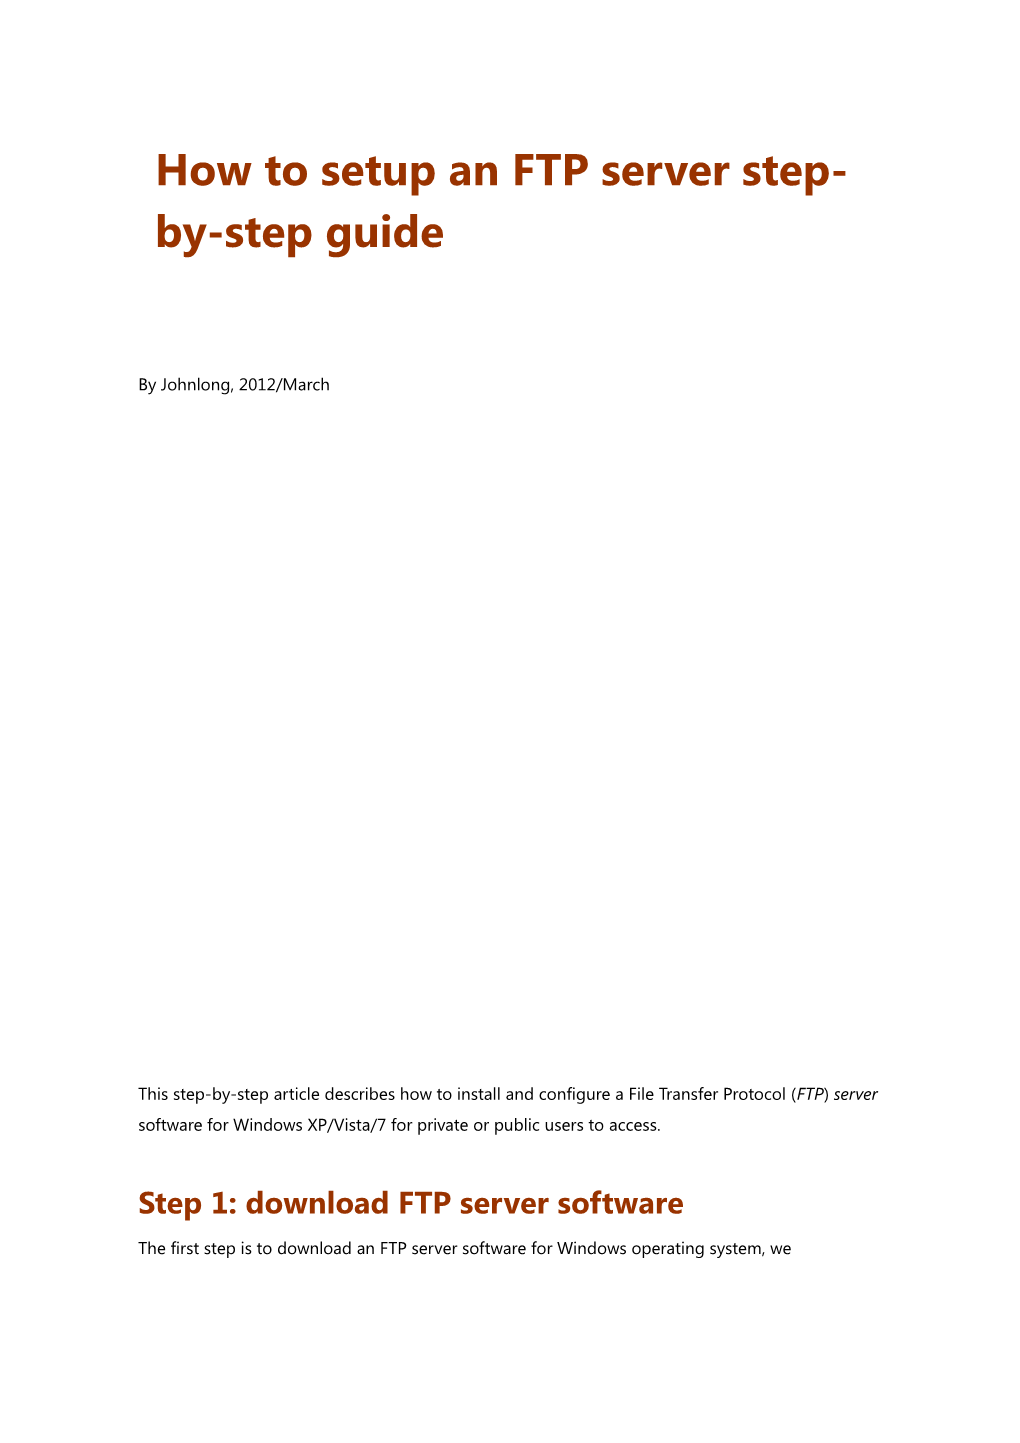 How to Setup an FTP Server Step-By-Step Guide